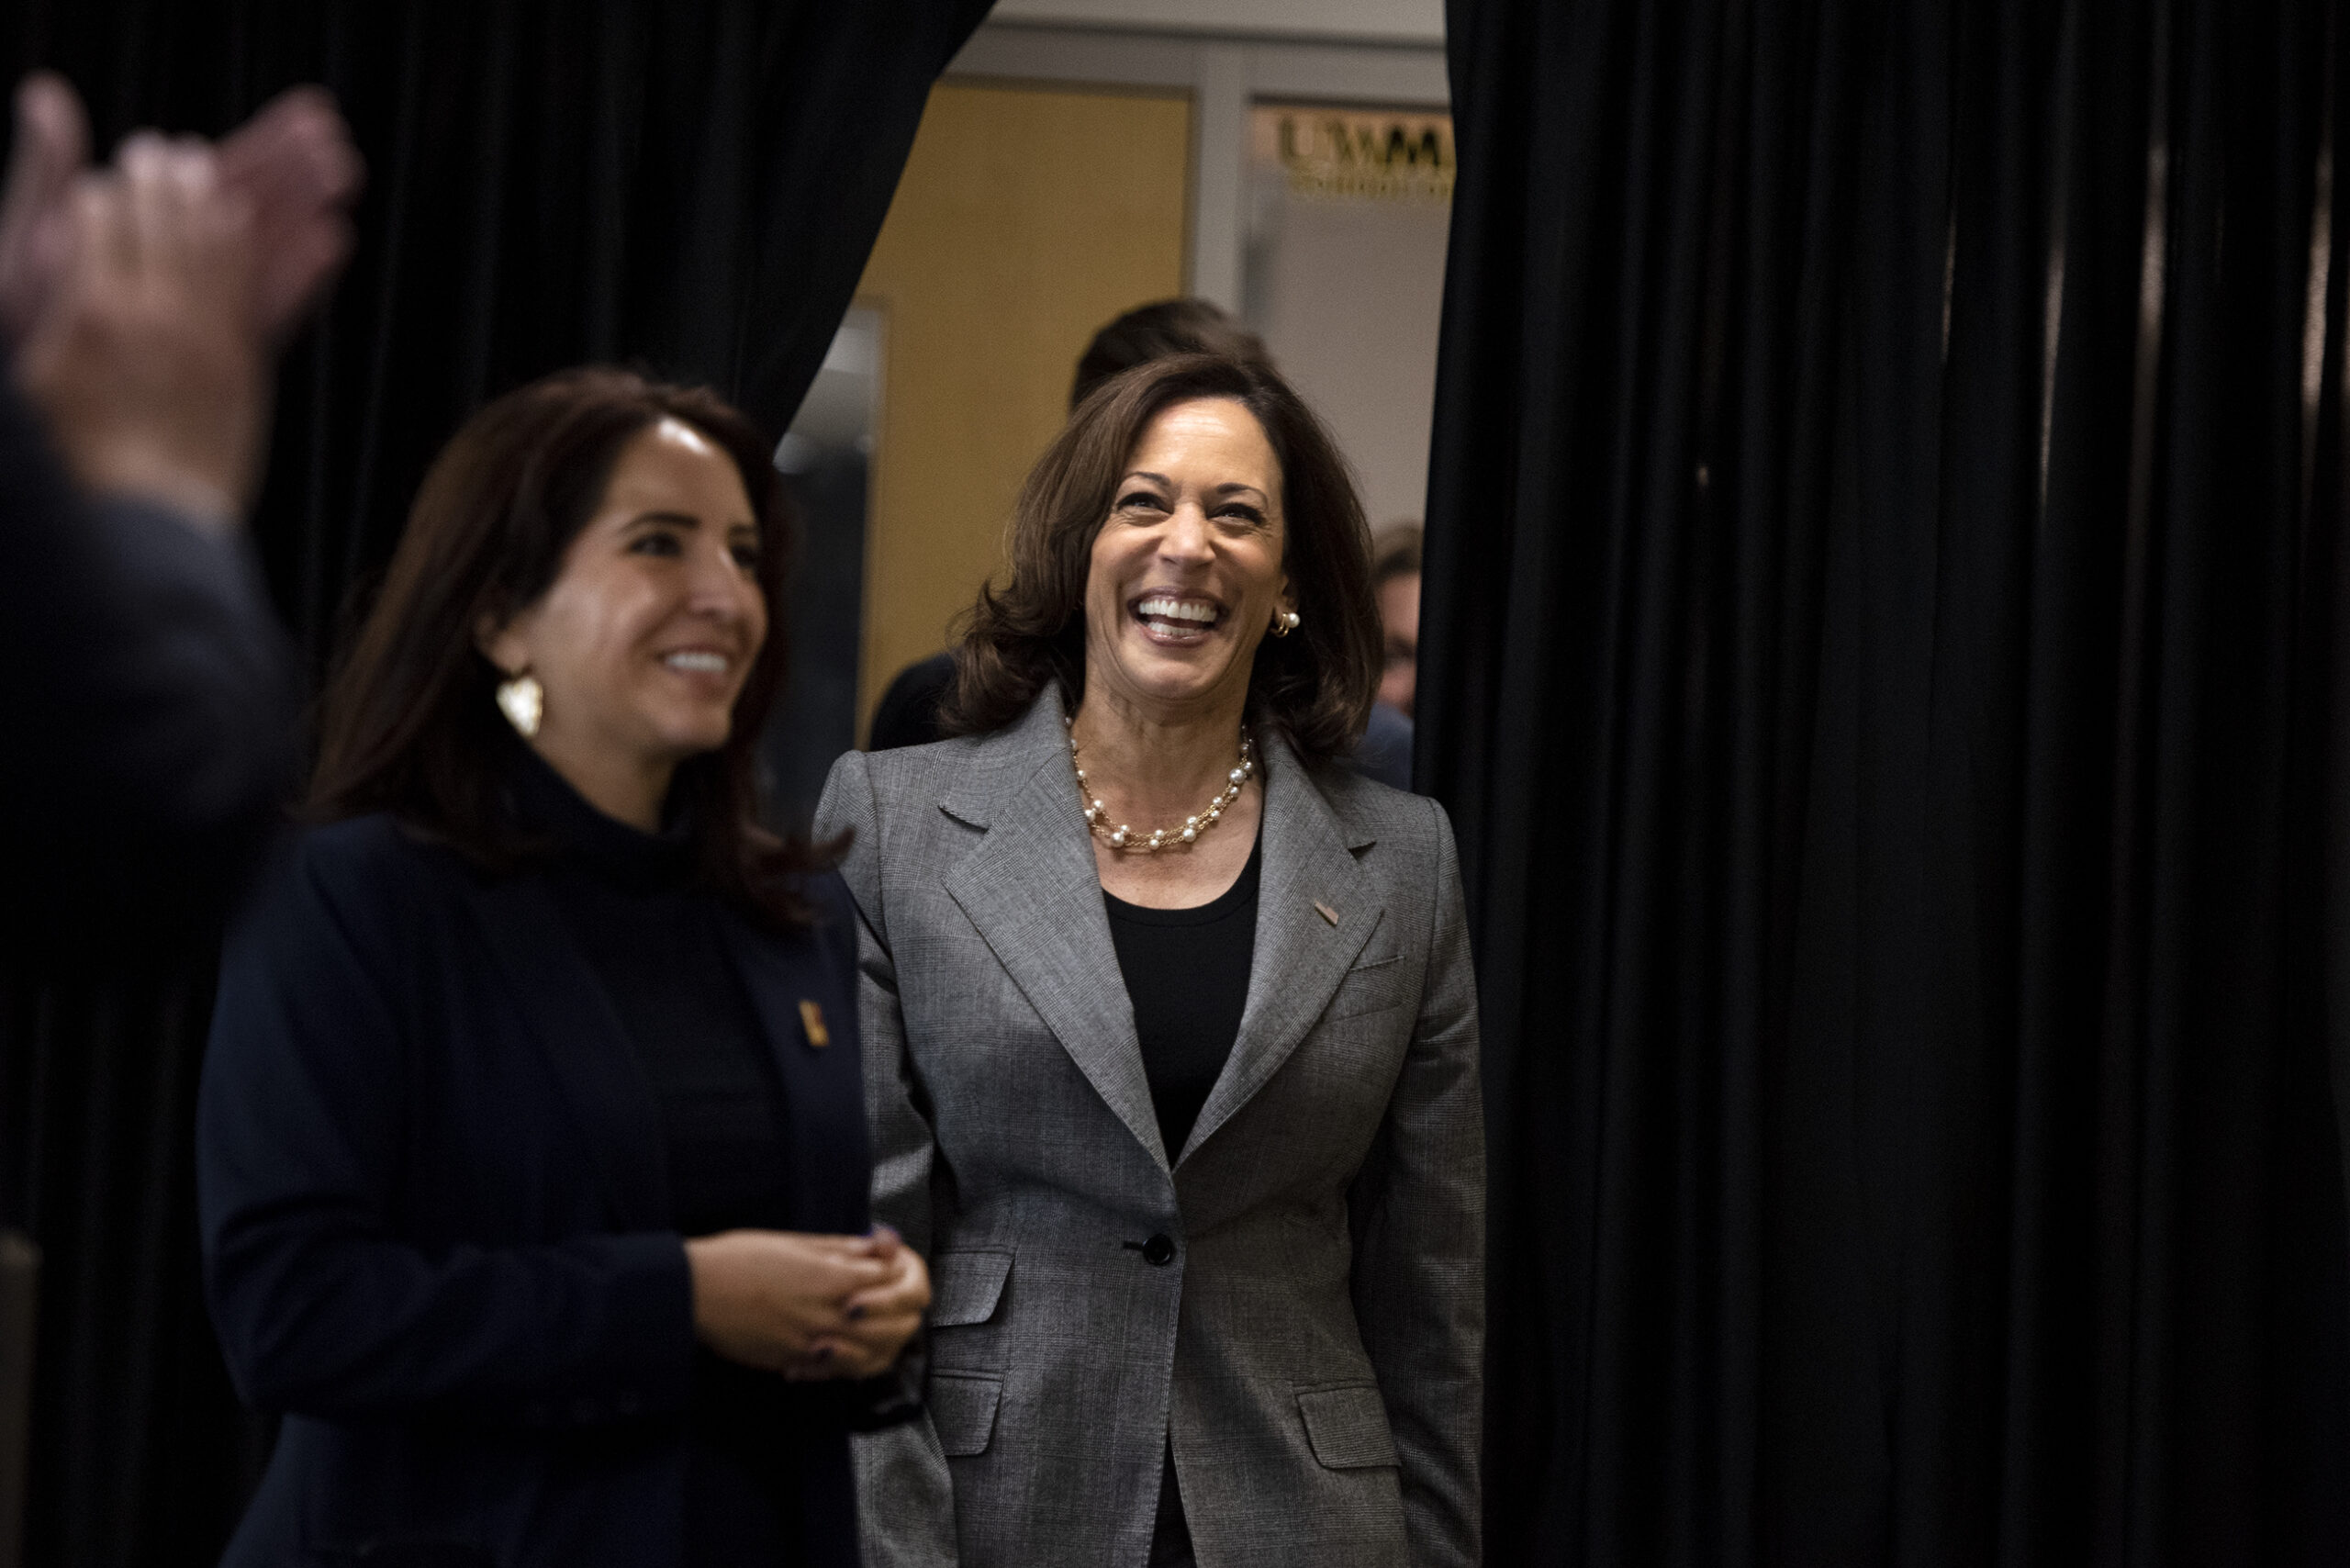 Vice President Kamala Harris enters out of a black curtain and smiles as she is greeted by people.